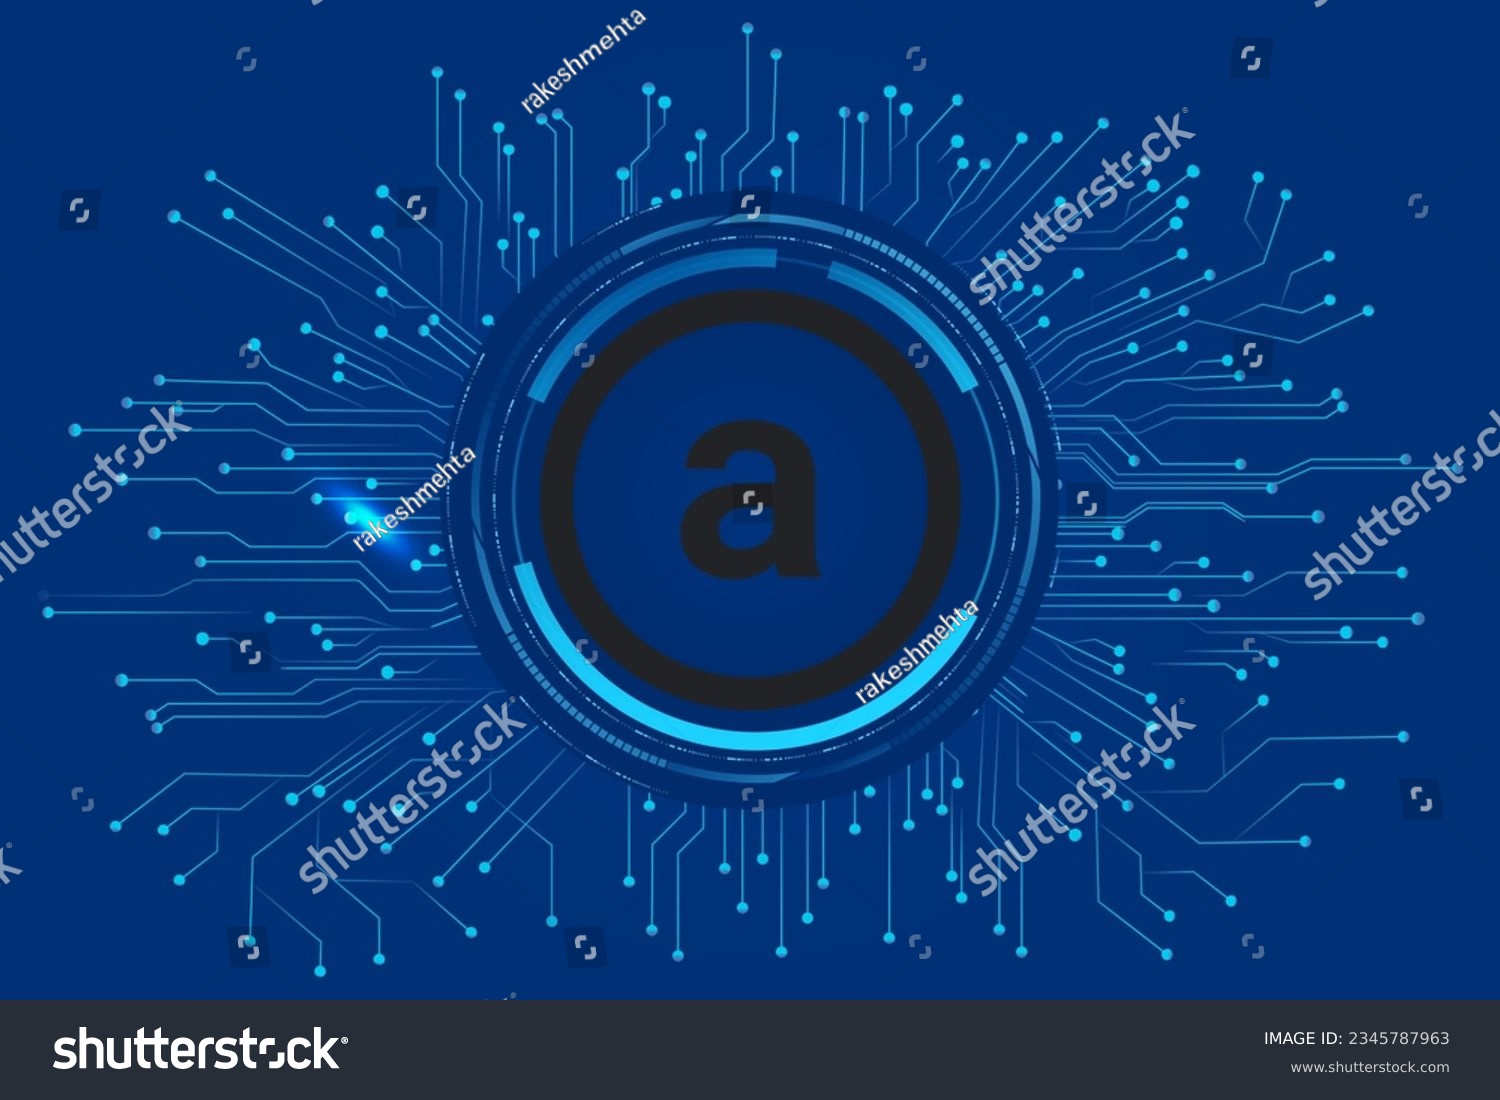 SVG of Arweave (AR) cryptocurrency  isolated on blue  background with circuit lines  vector illustration svg